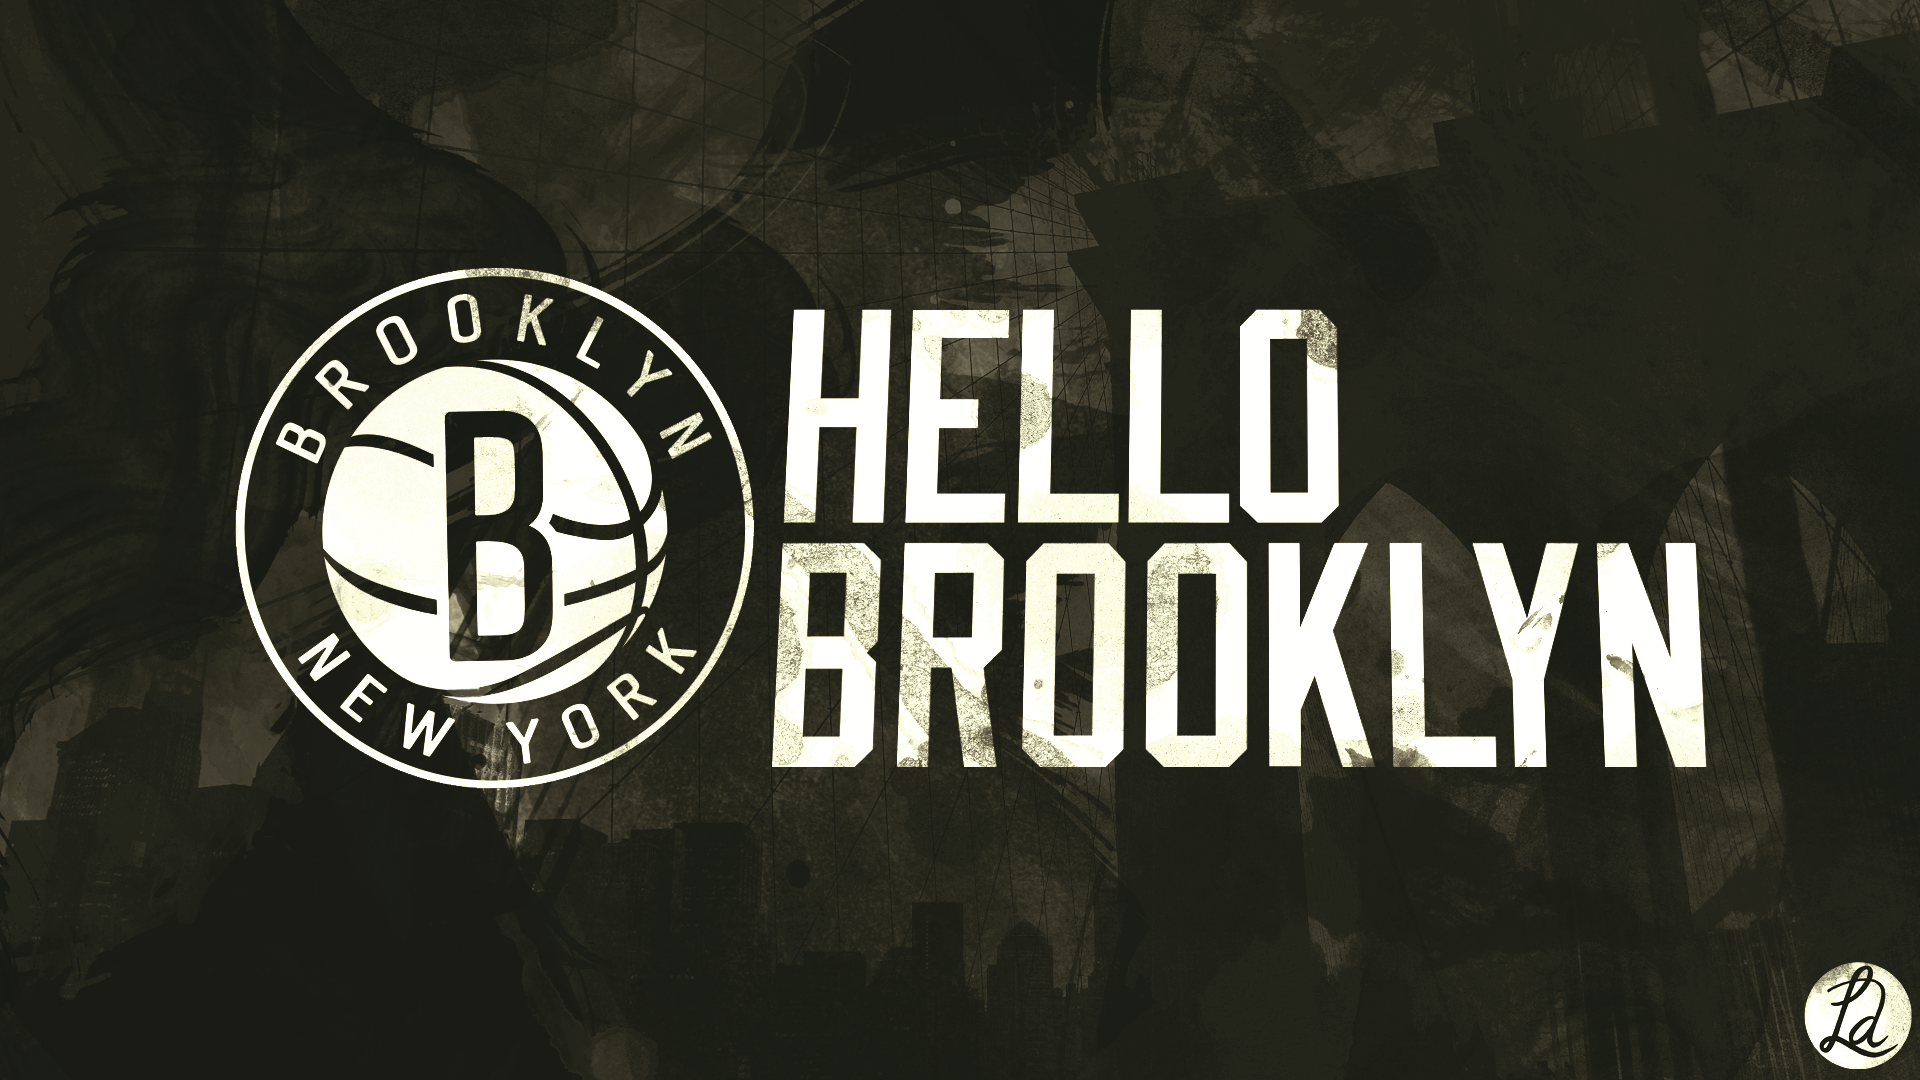 Hello Brooklyn by lucasitodesign Download from DeviantART